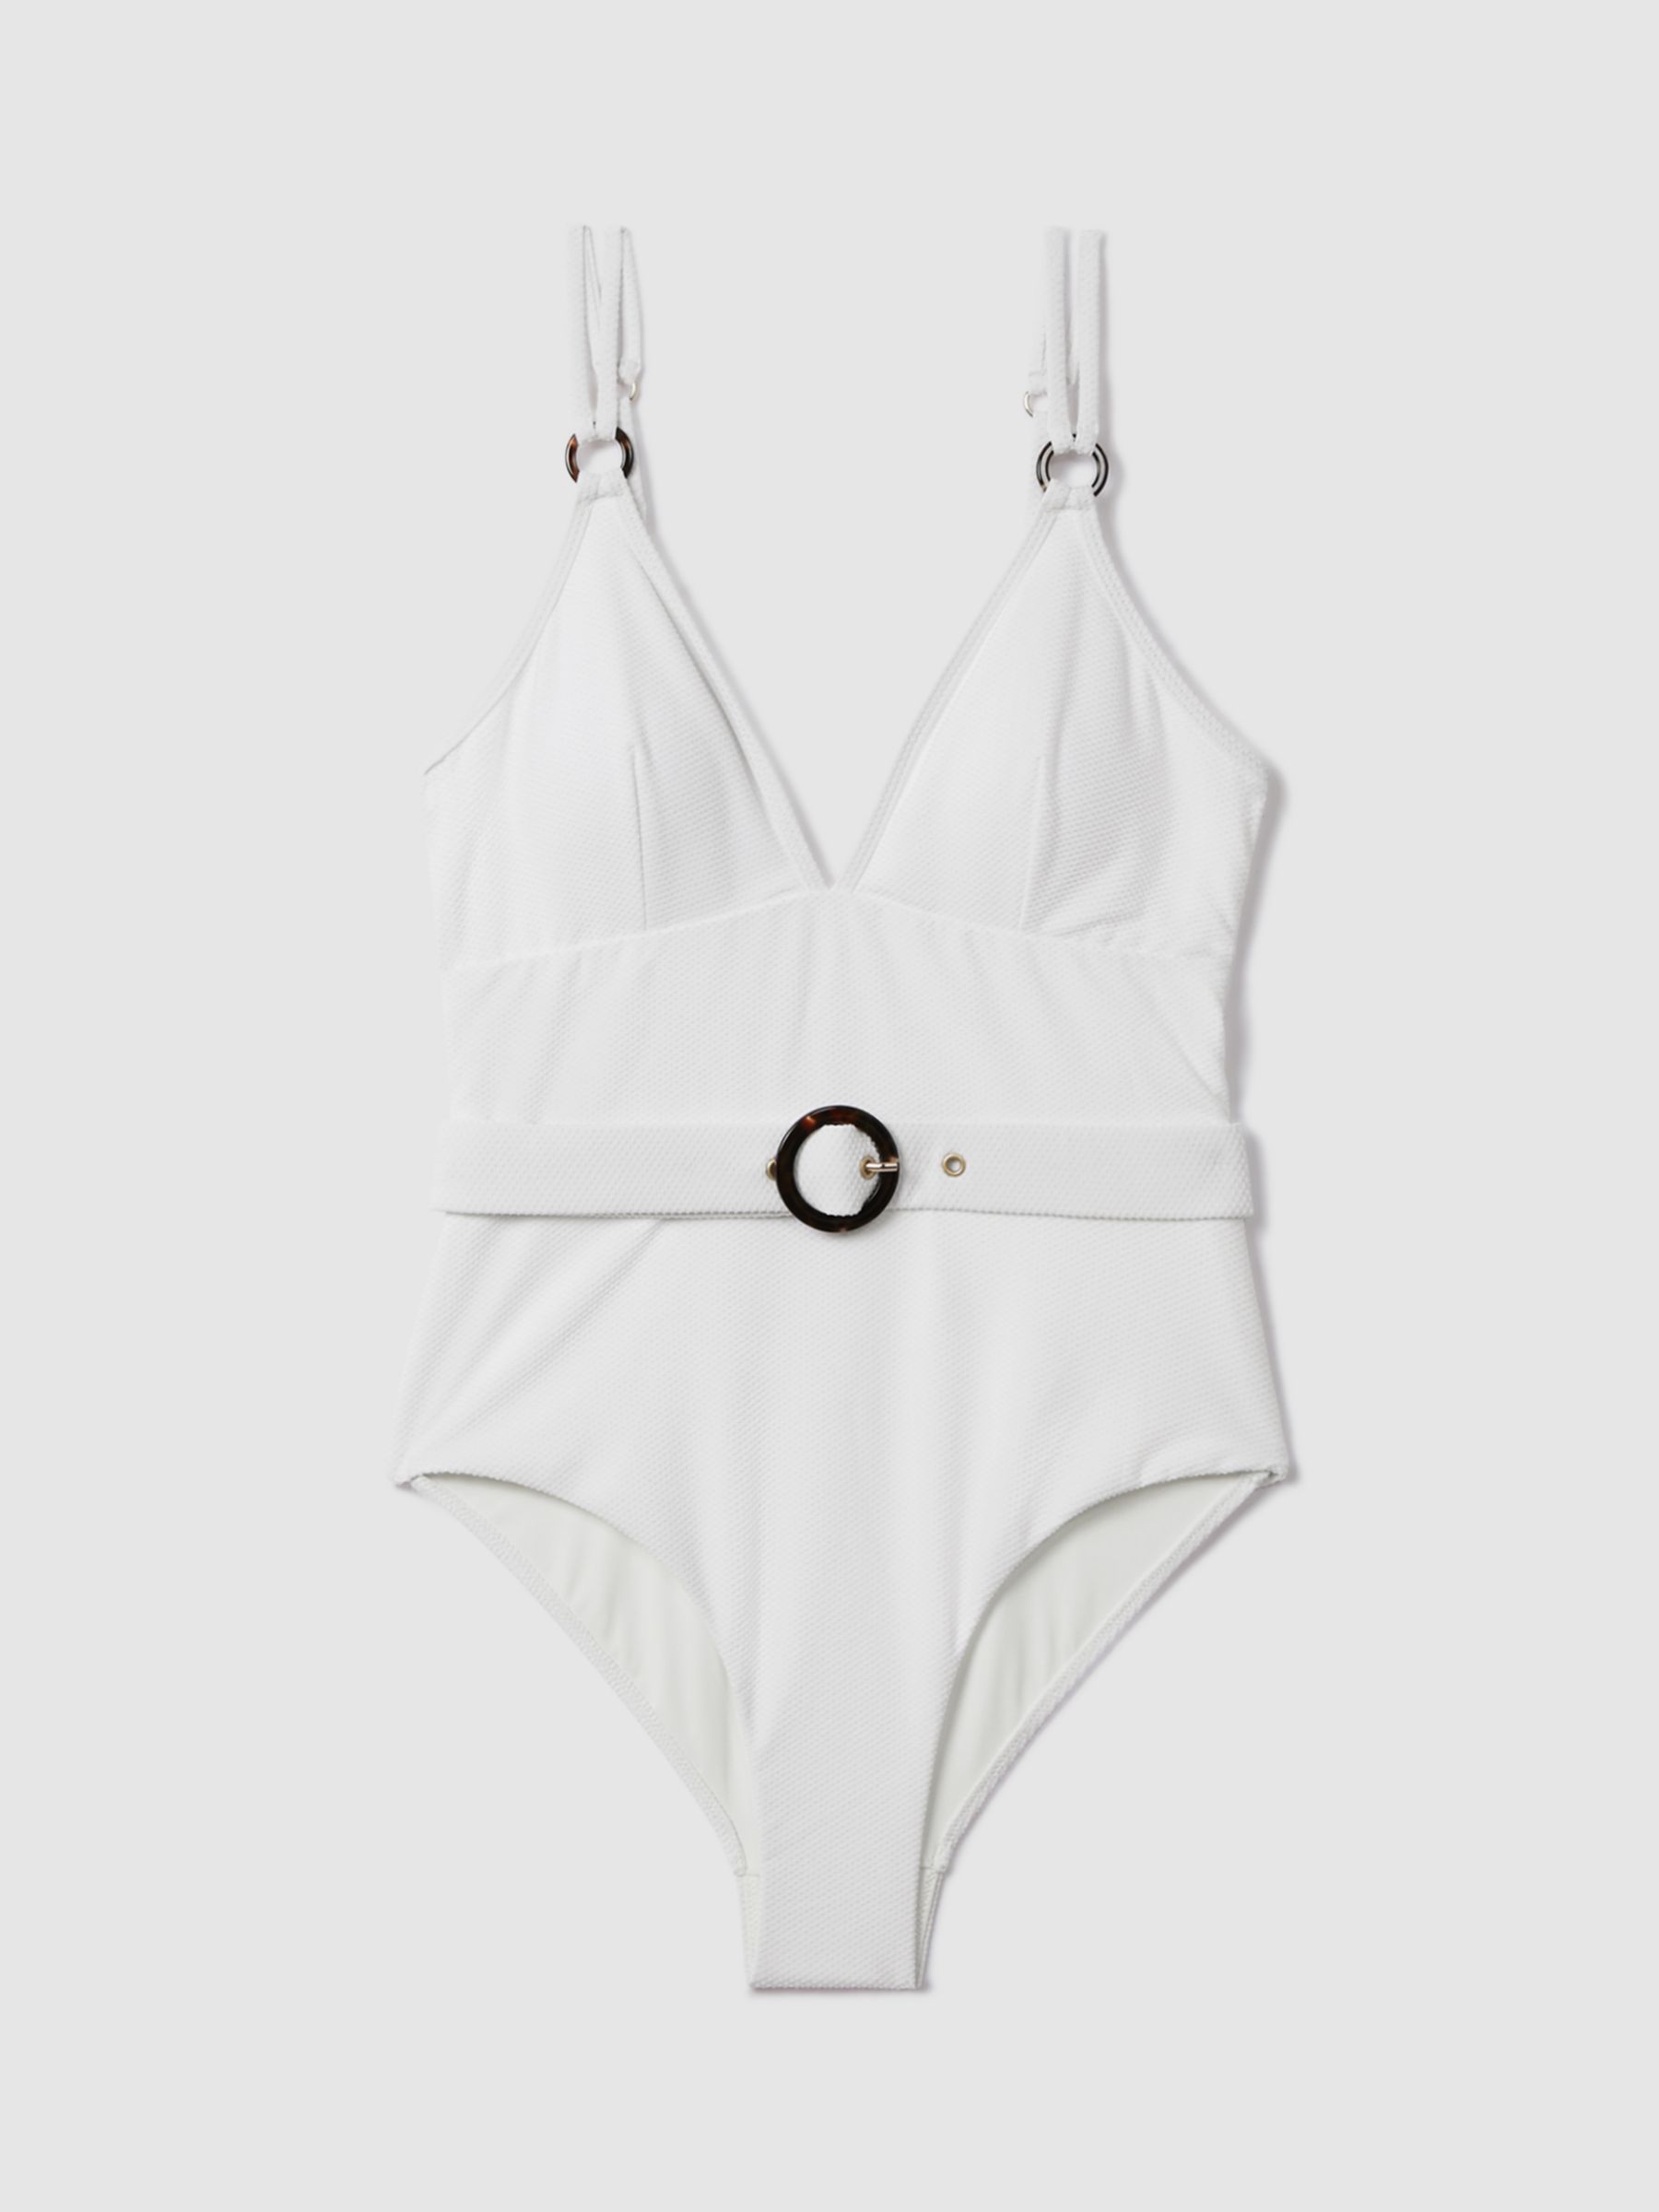 Reiss Alora Traingle Cup Belted Swimsuit, White, 4